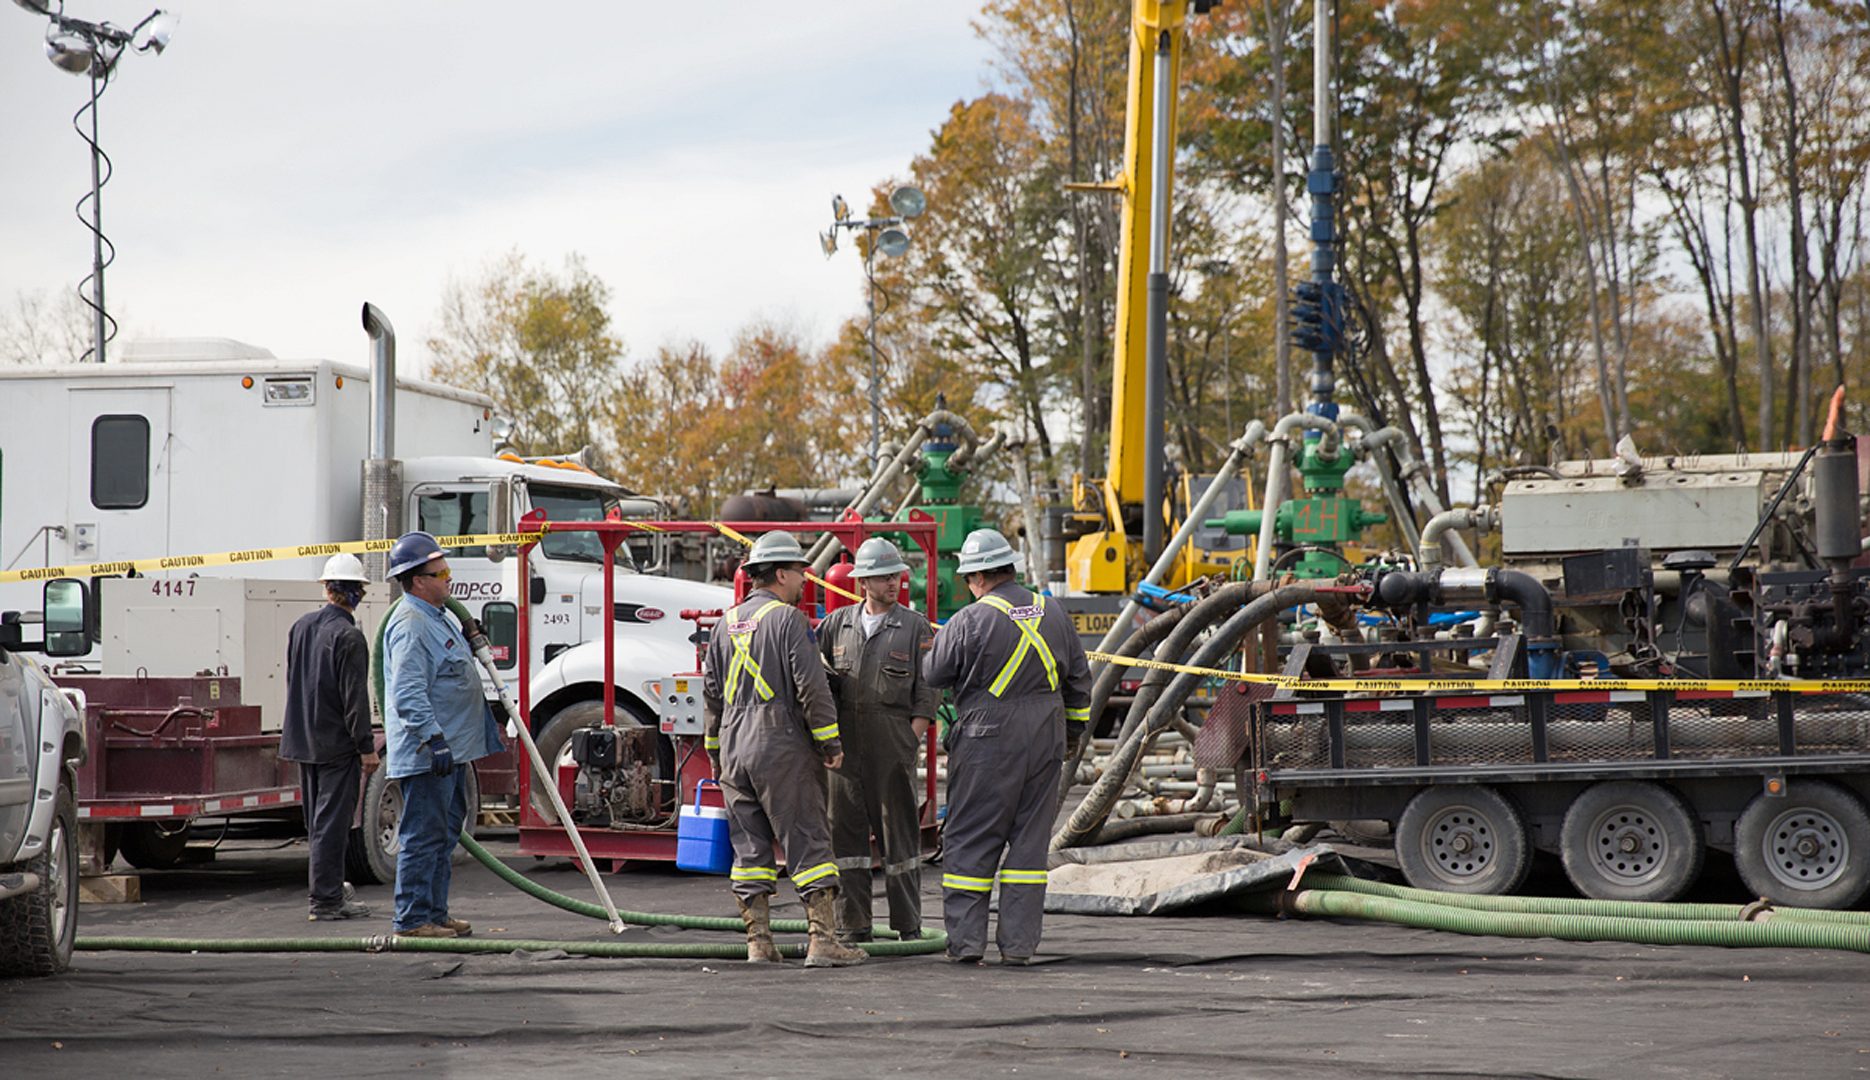 Workers at a frack site in Harford Township, Pa. Under new EPA rules, gas drillers will have to step up their measurements and reporting of methane leaks.